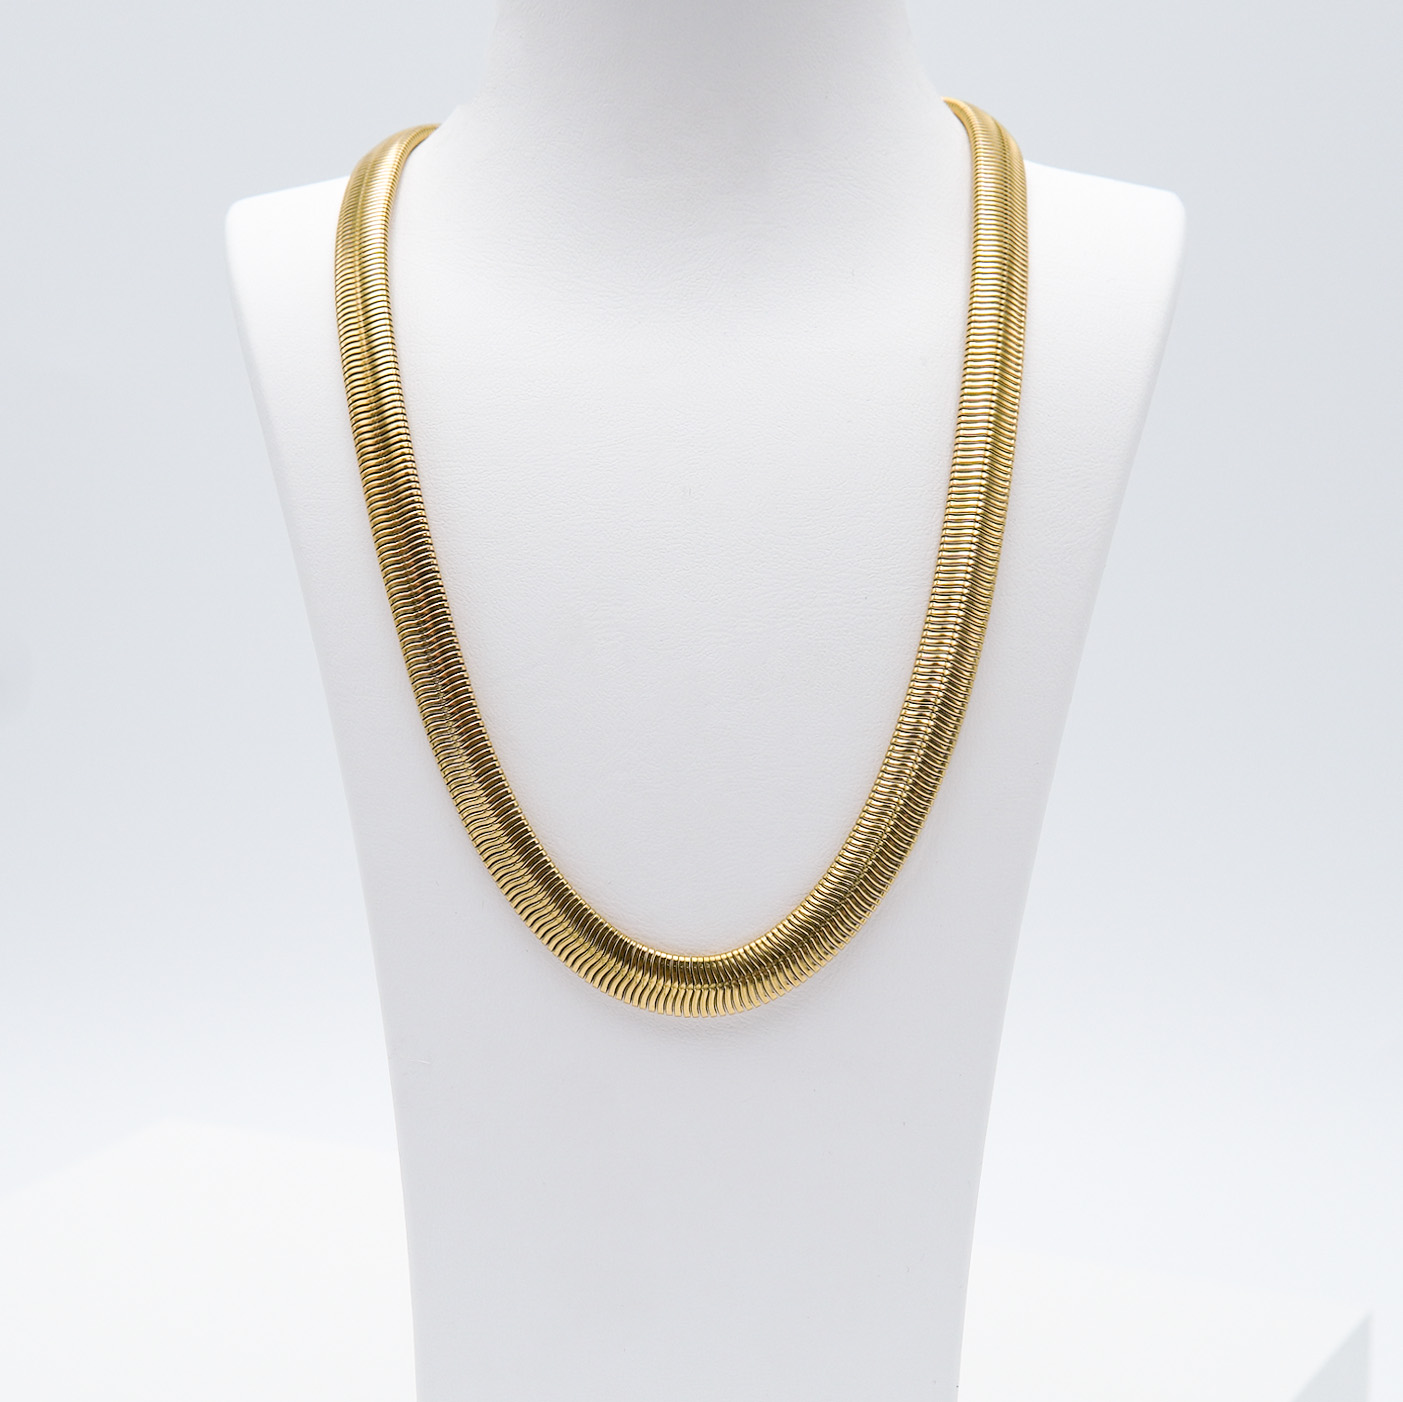 1- Marilyn Monroe Necklace Gold Edition Halsband Modern and trendy Necklace and women jewelry and accessories from SWEVALI fashion Sweden